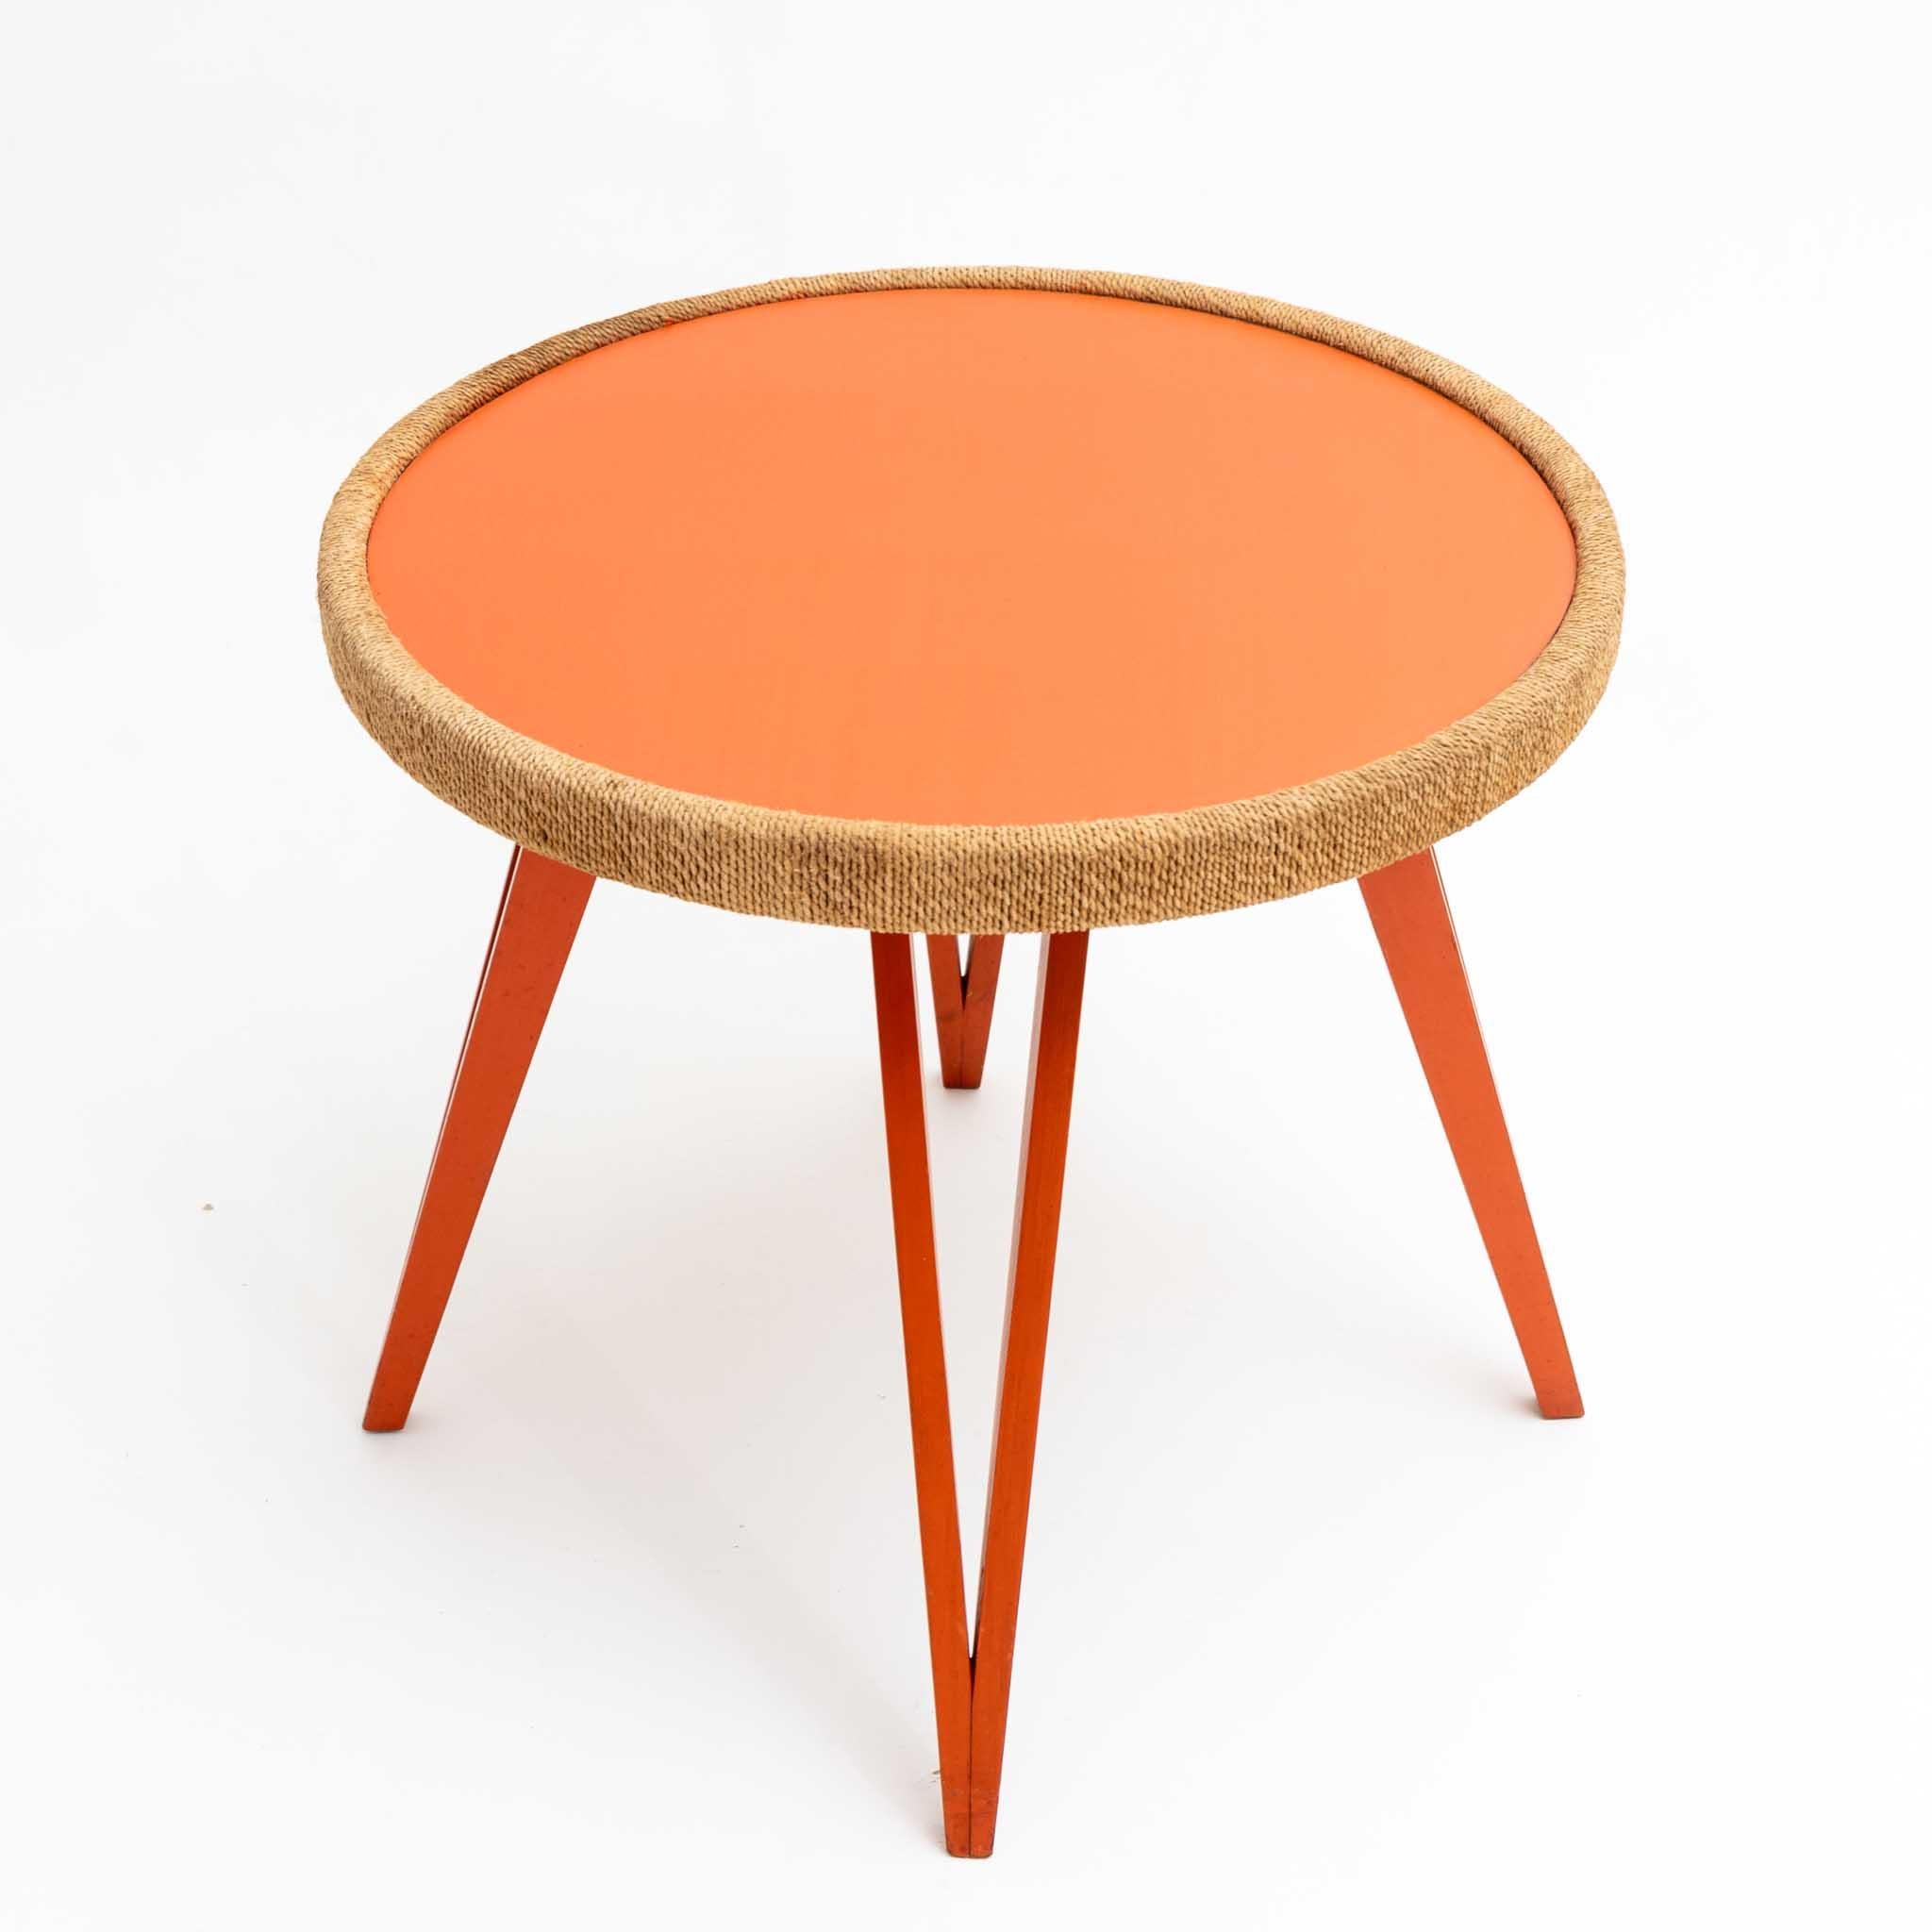 Coffee table on hairpin legs in orange-red colored wood and round table top with corded edge in natural fiber. The table top is also in a shade of orange. The table is attributed to the Italian designer Augusto Romano (1918-2001).